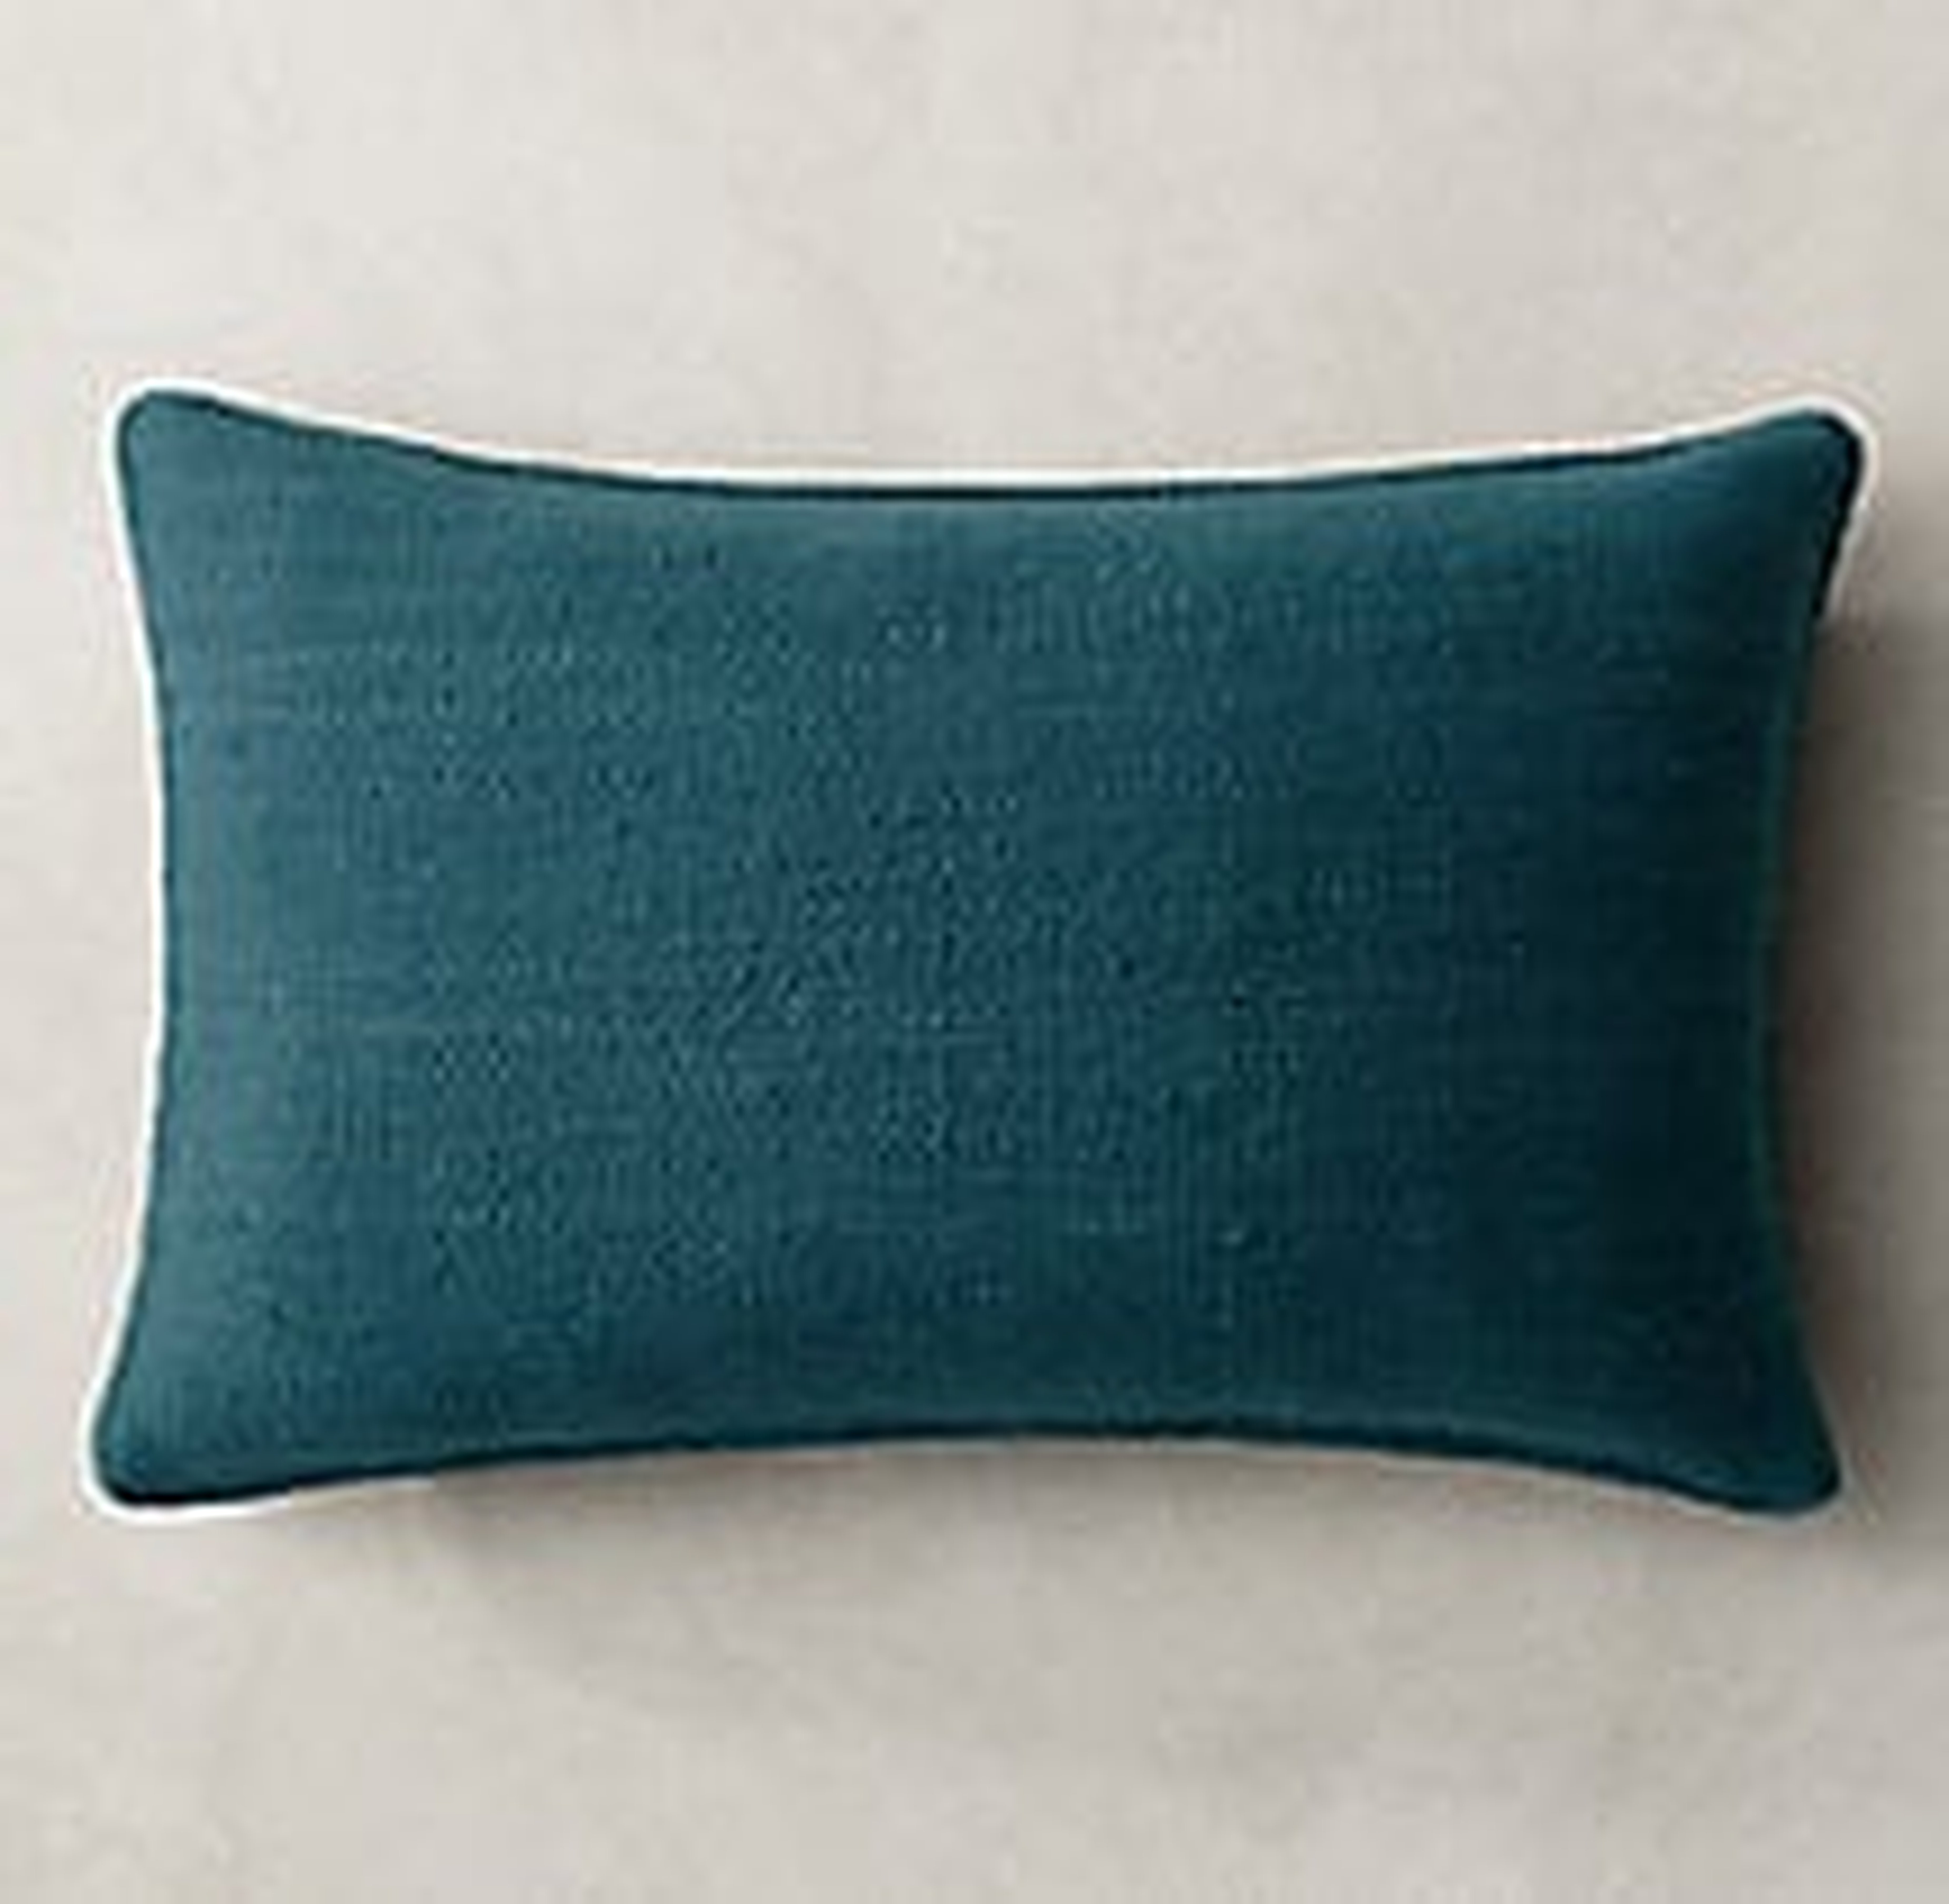 HEATHERED FLATWEAVE PILLOW COVER - LUMBAR - 13" X 21"- insert not included - RH